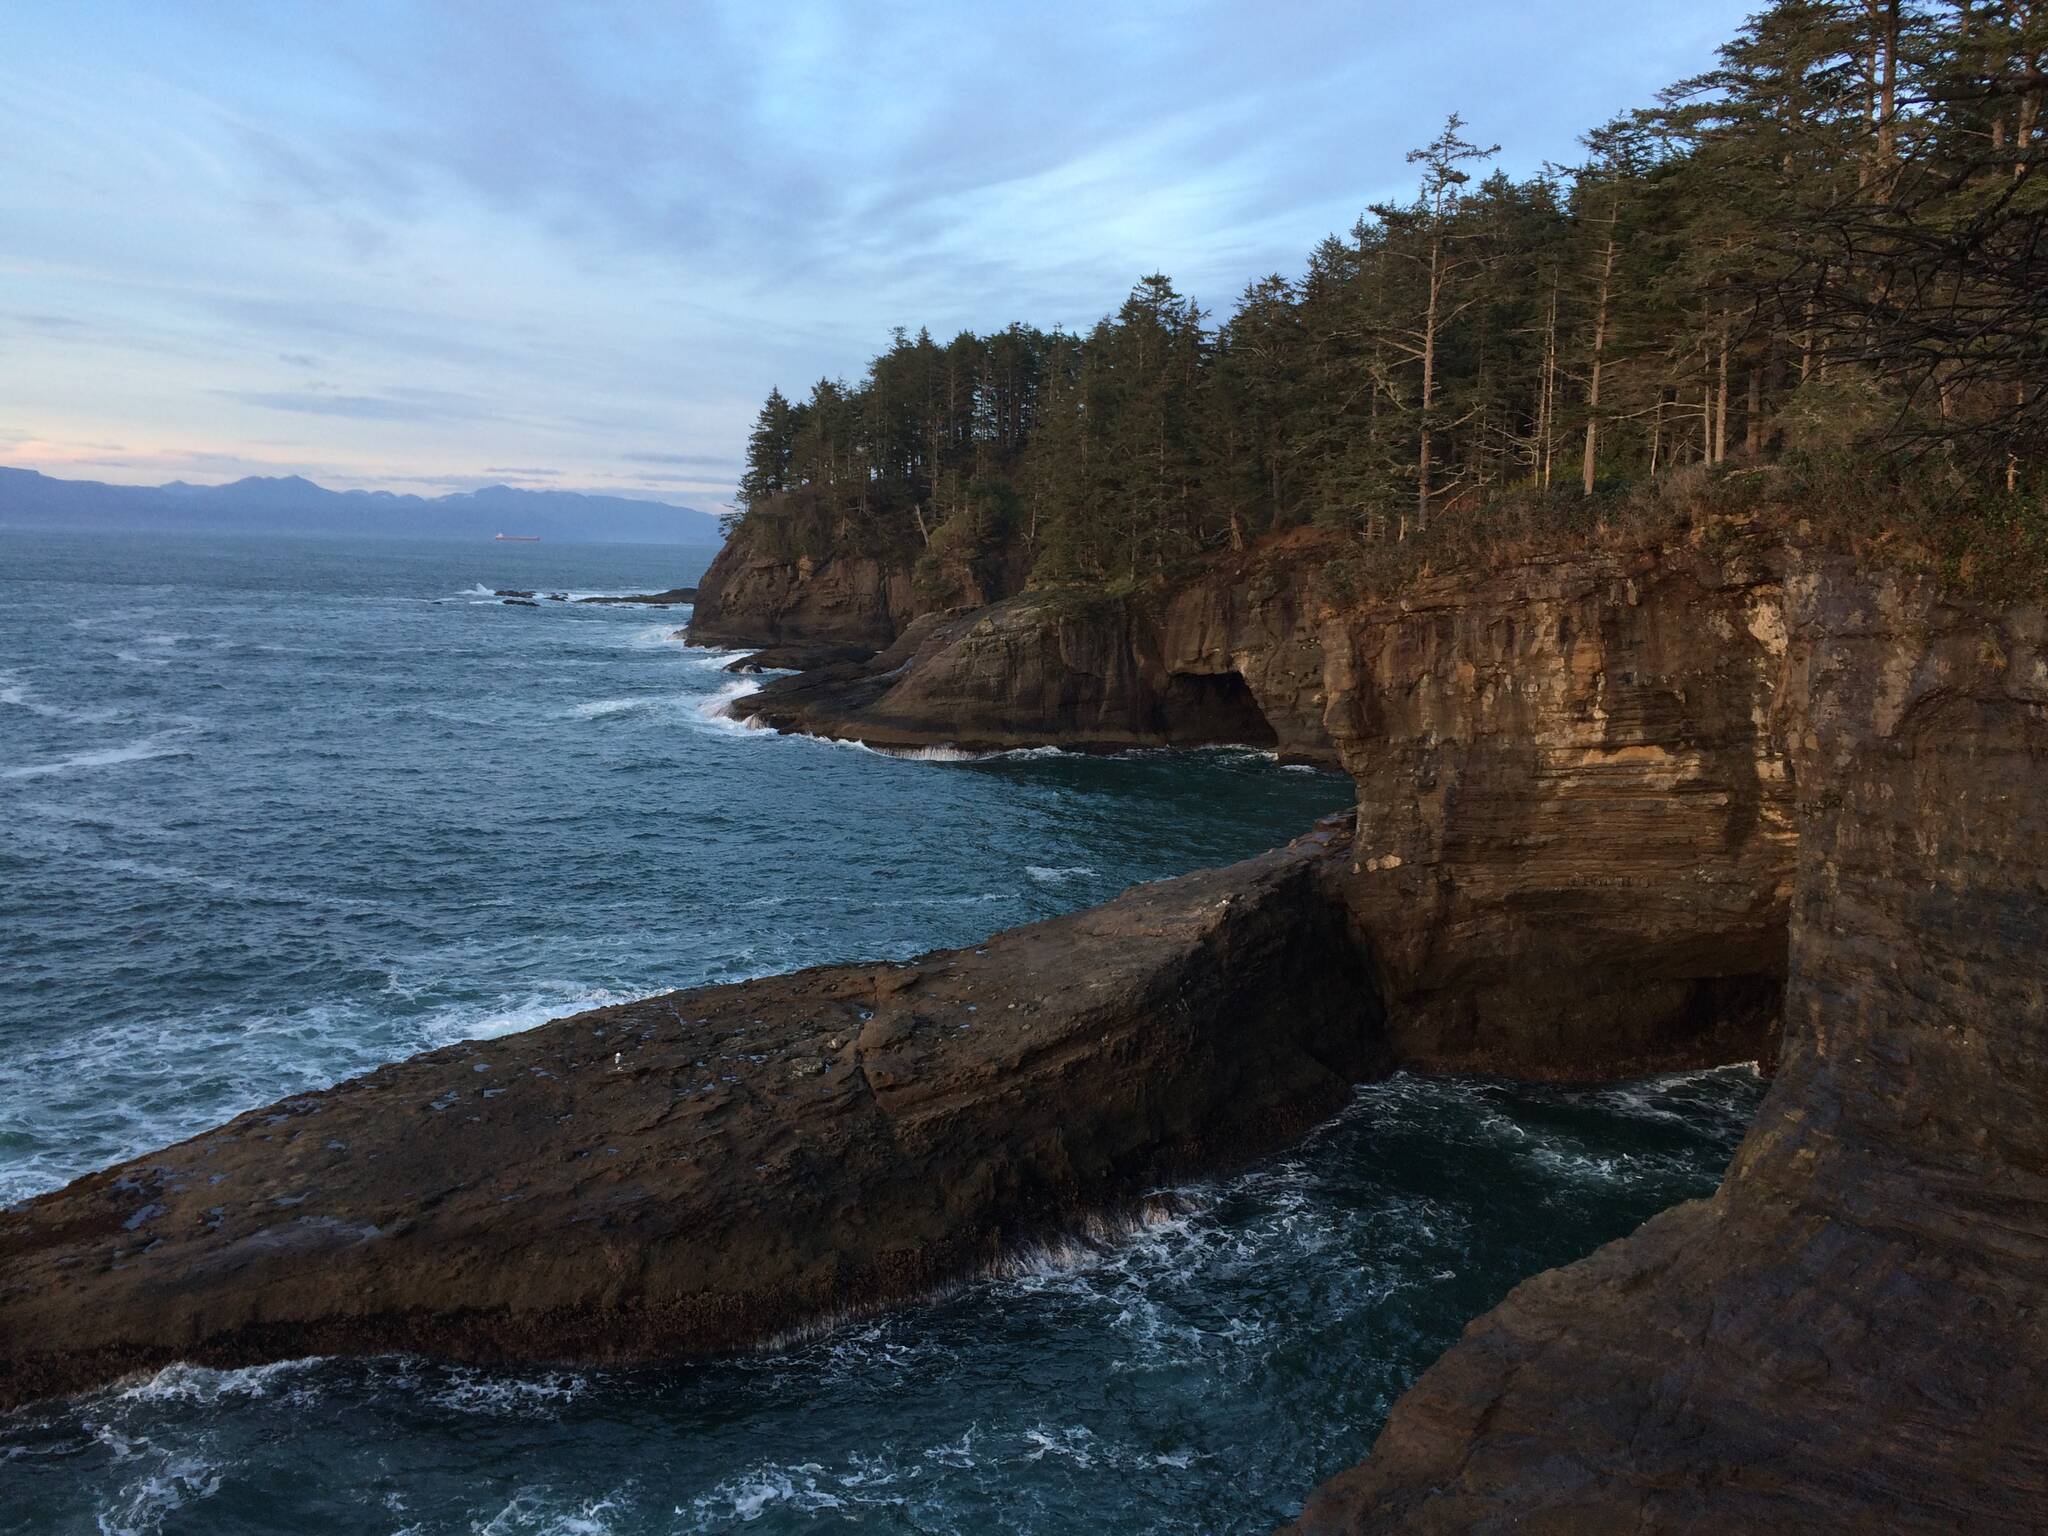 Photo by Jenny Waddell/National Oceanic and Atmospheric Administration
A view from Cape Flattery looking north towards shipping lanes at the entrance to the Strait of Juan de Fuca.